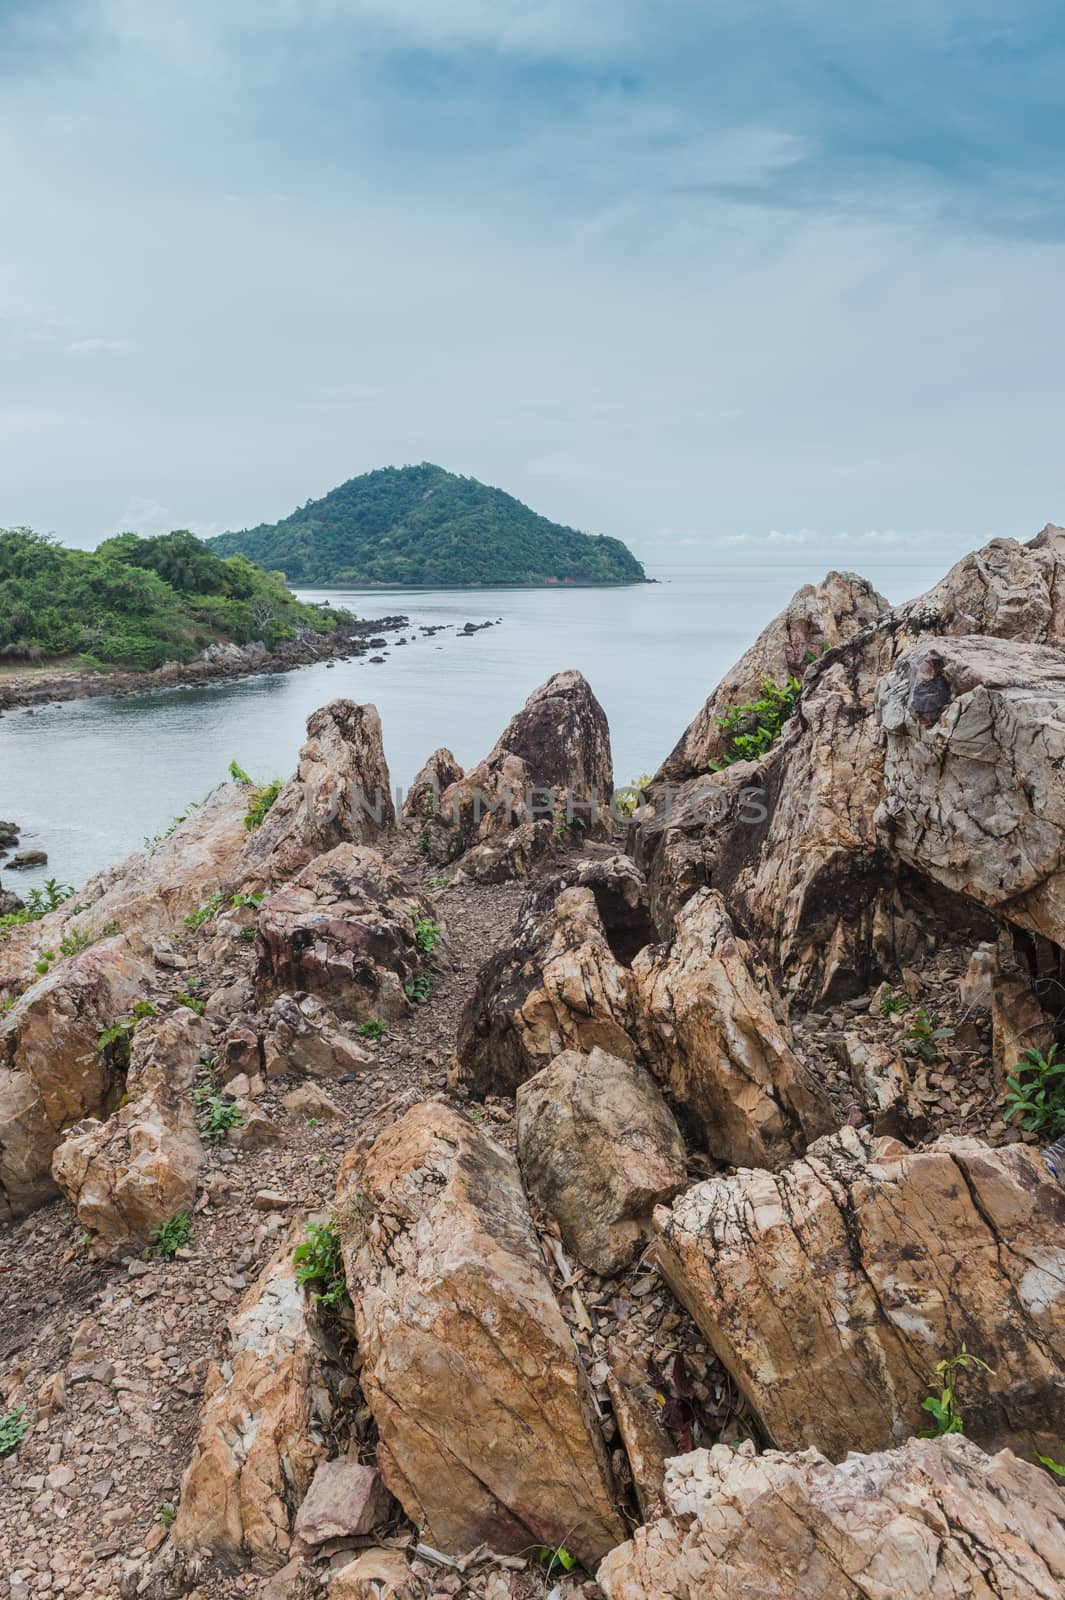 Landscape of rock beach and sea, Nang Phaya hill scenic point